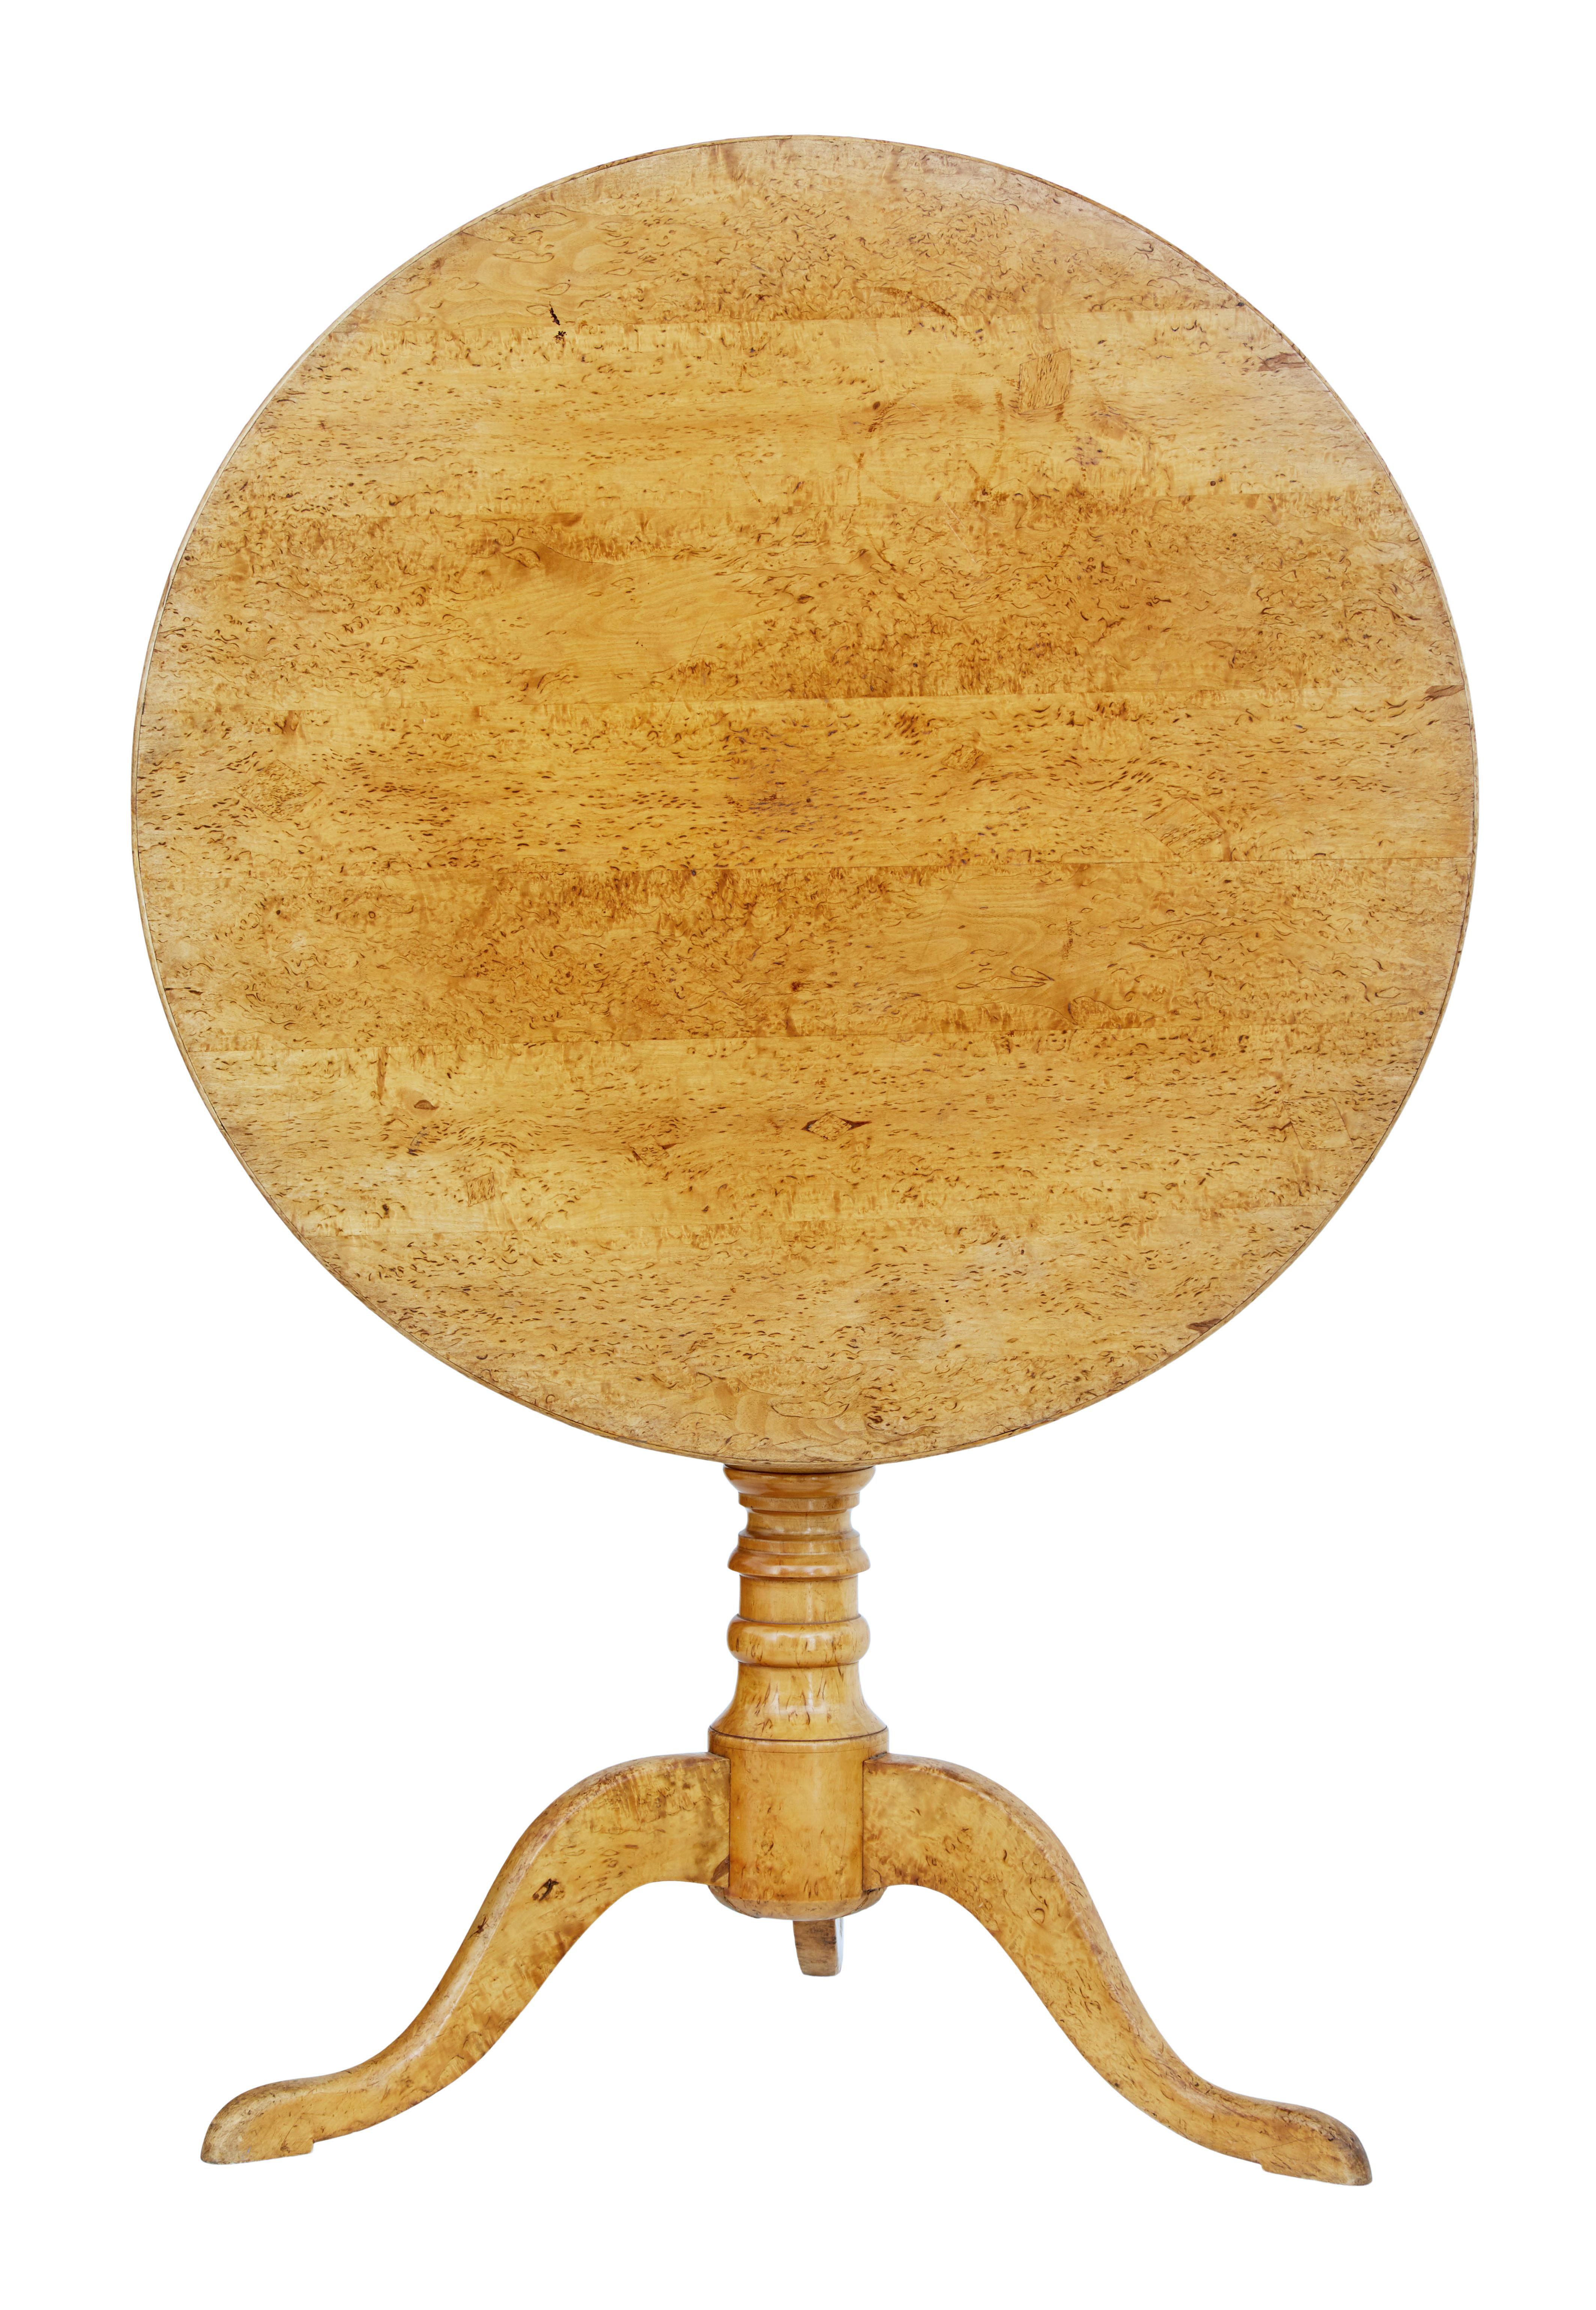 Beautiful round tilt-top table, circa 1870.

Stunning burr birch veneered round top, which tilts for easier storage when not in use. Top held in place by wooden peg.

Standing on a solid turned stem and tripod feet of the same burr